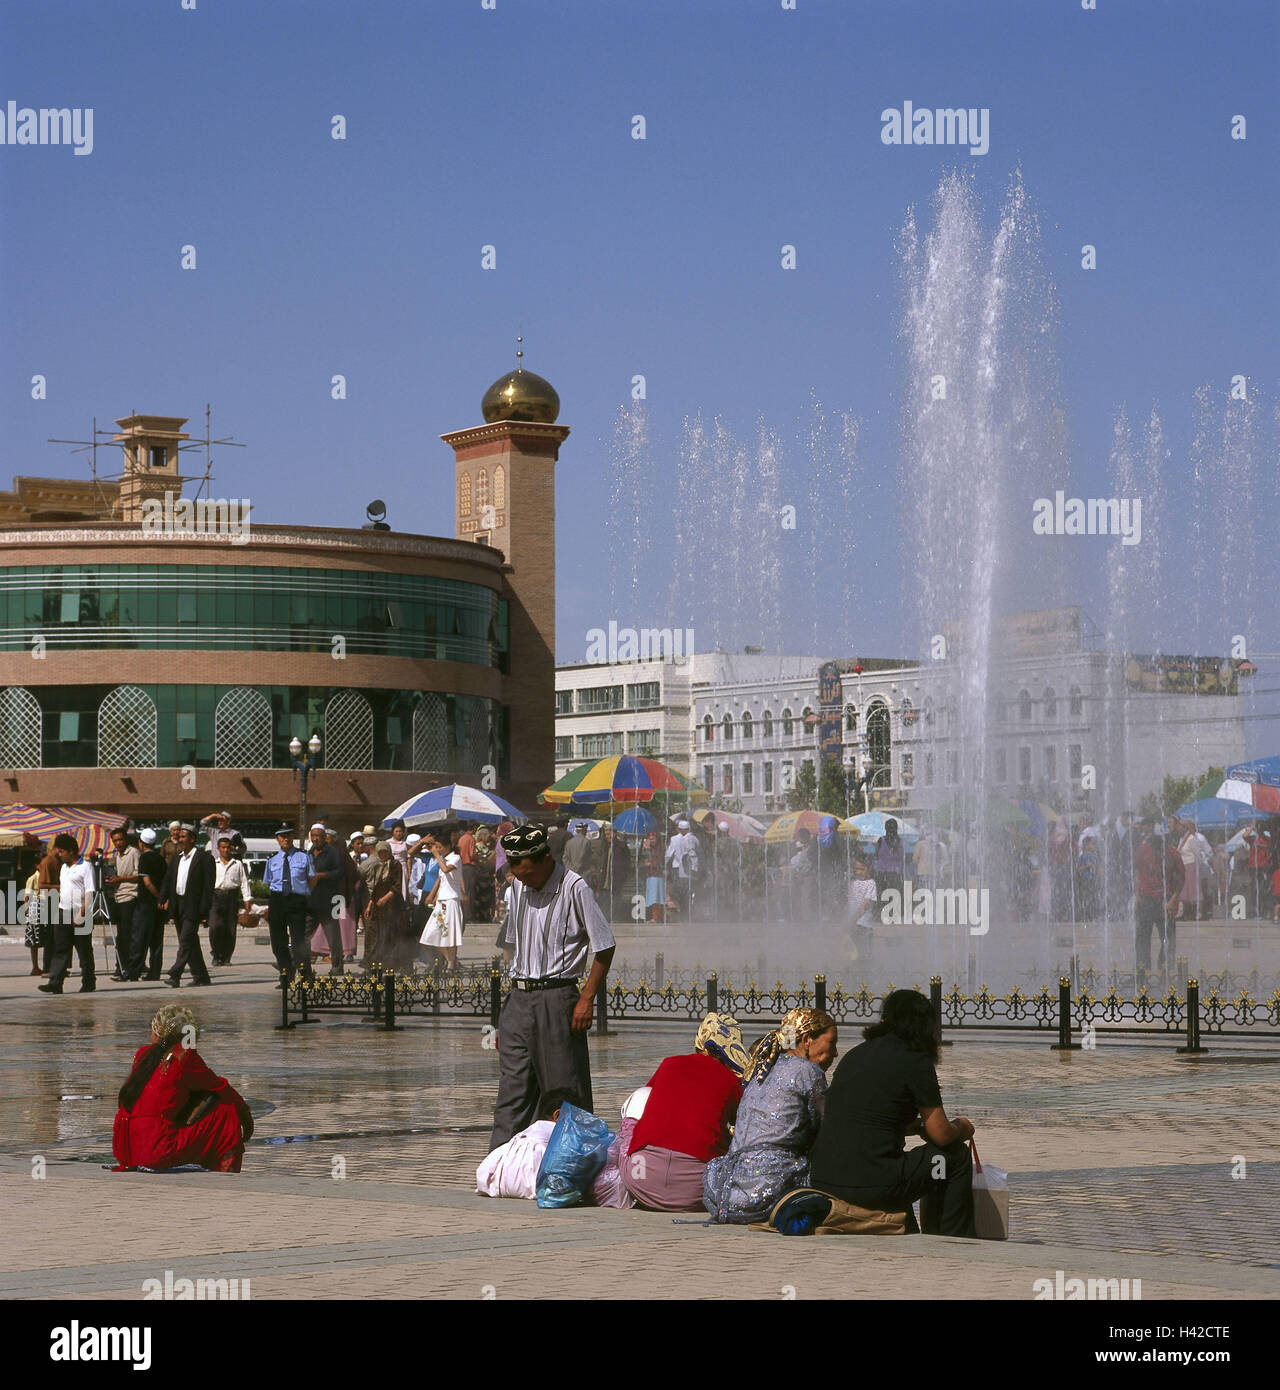 China, region Sinkiang, Framing-even, Id Kah Mosque Square, wells, passers-by, no model release, Asia, Silk Road, Xinjiang, Kashi, town view, town, city centre, building, fountain, water fountains, space, forecourt Idkah mosque, market, bazaar, person, outside, Stock Photo